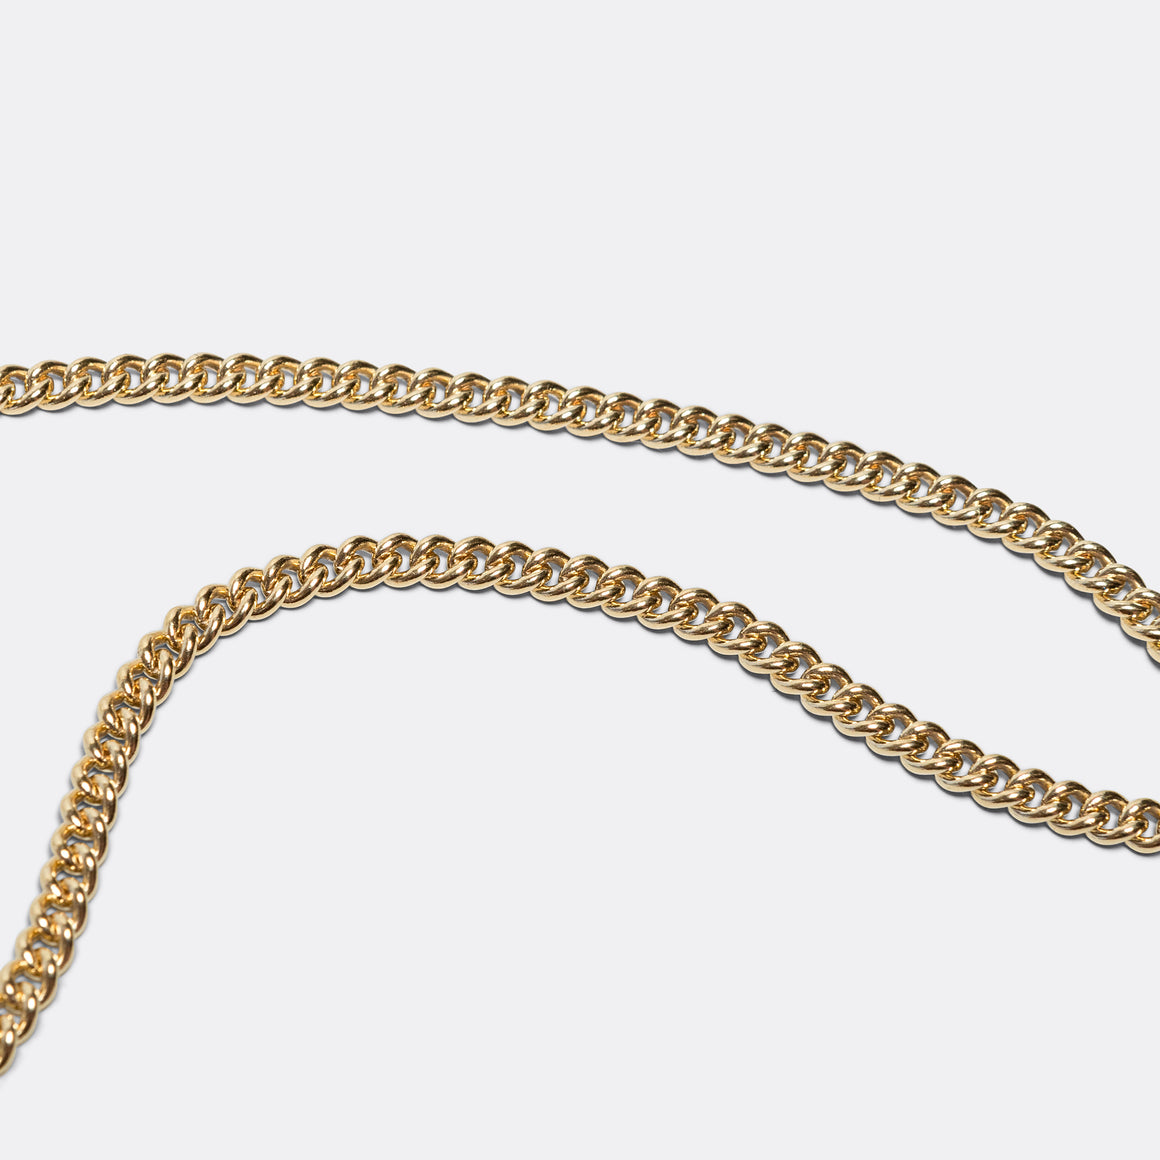 Curb Chain 4mm - 14K Gold Filled